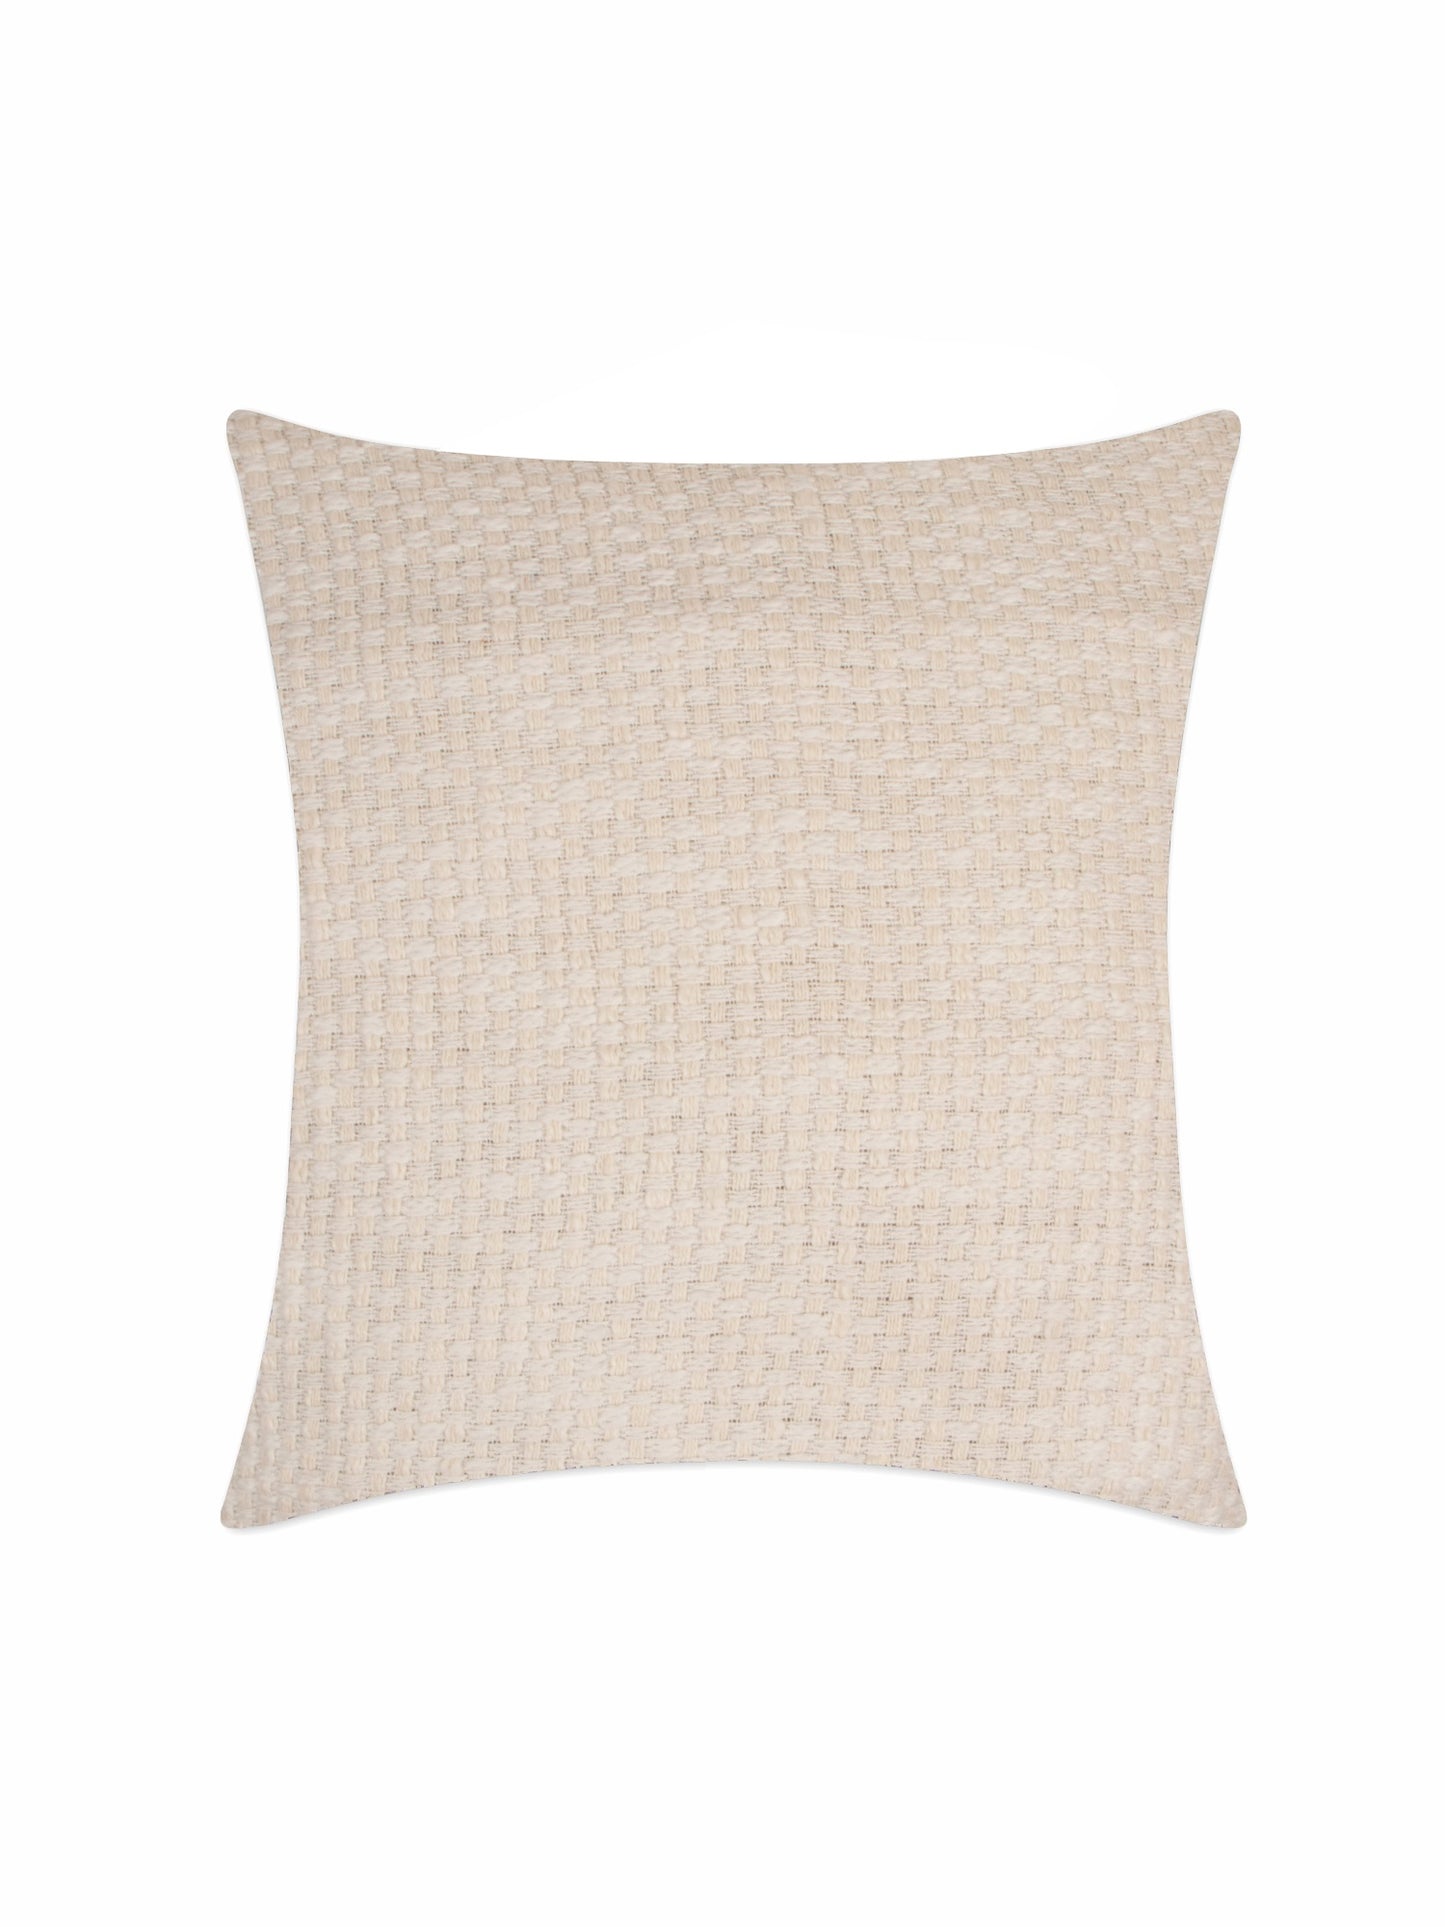 White cotton two tone basket weave pattern cushion cover